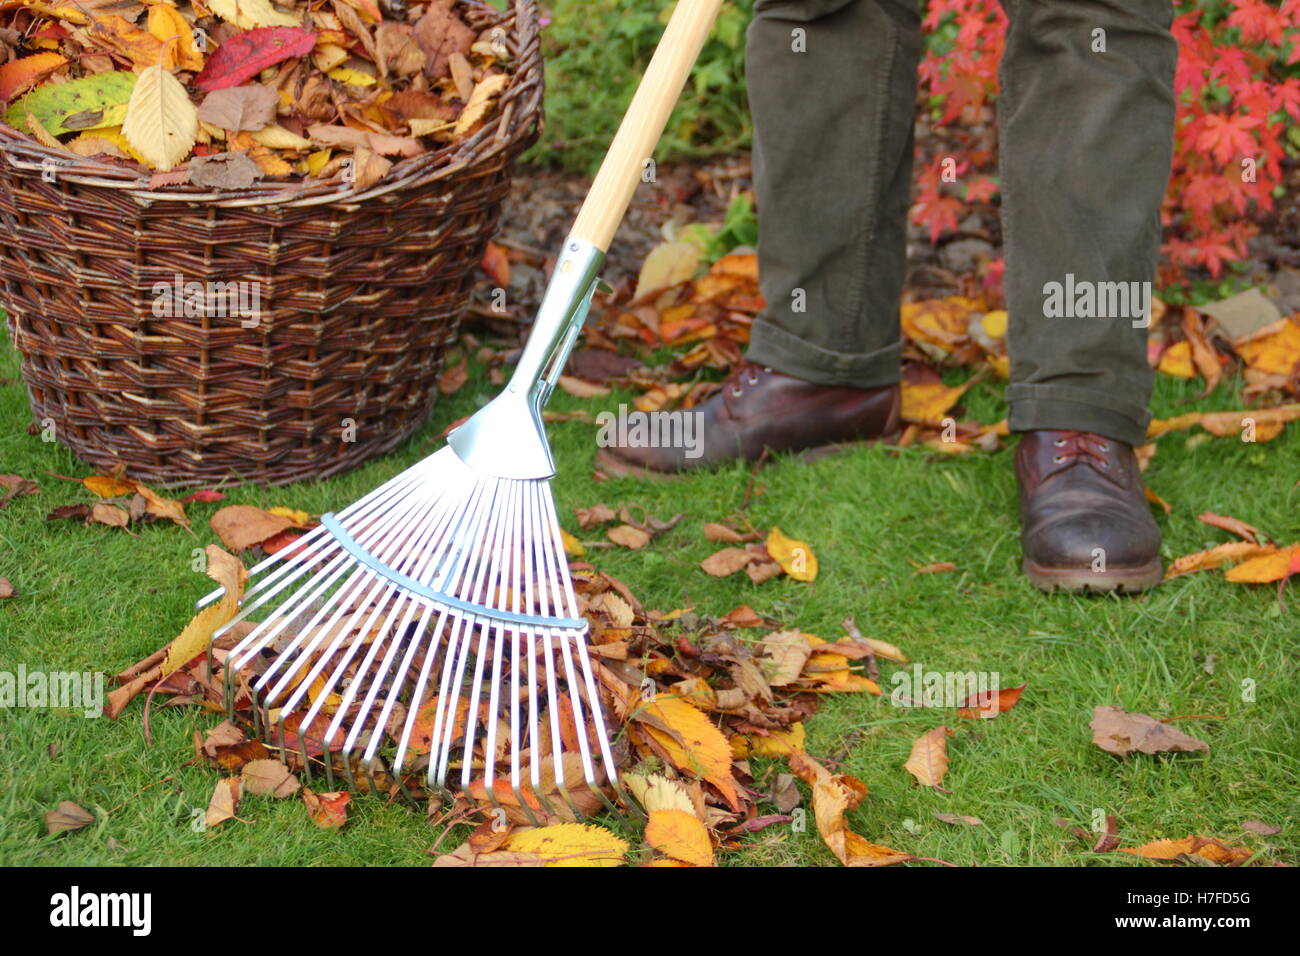 A gardener rakes up fallen ornamental cherry tree leaves (prunus) from a garden lawn on a bright autumn day in England, UK Stock Photo